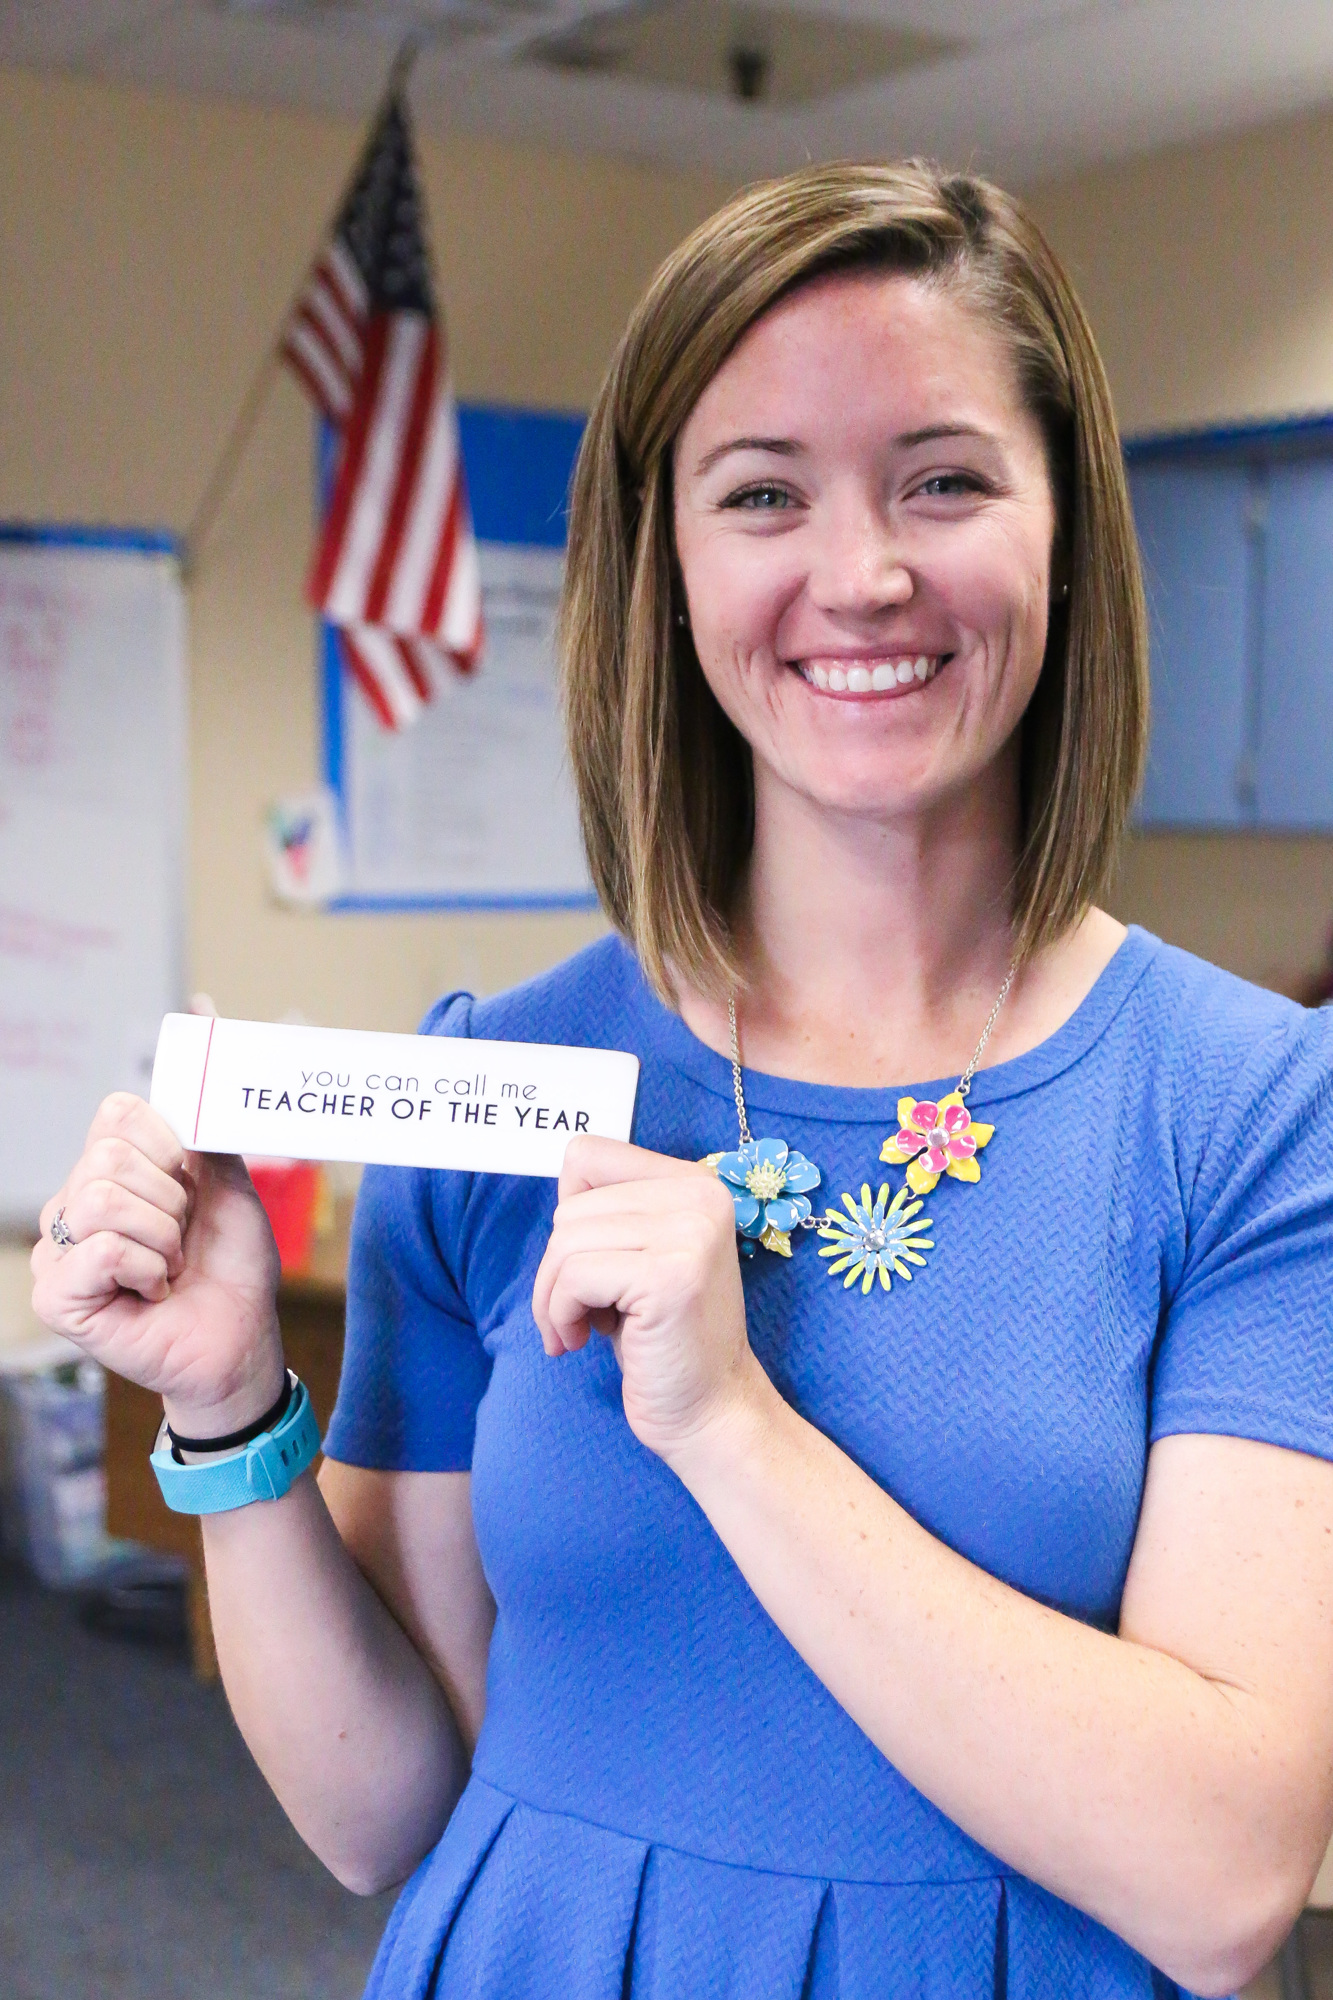 Ashley Reynolds holds up a Teacher of the Year token for her desk. Photo by Paige Wilson